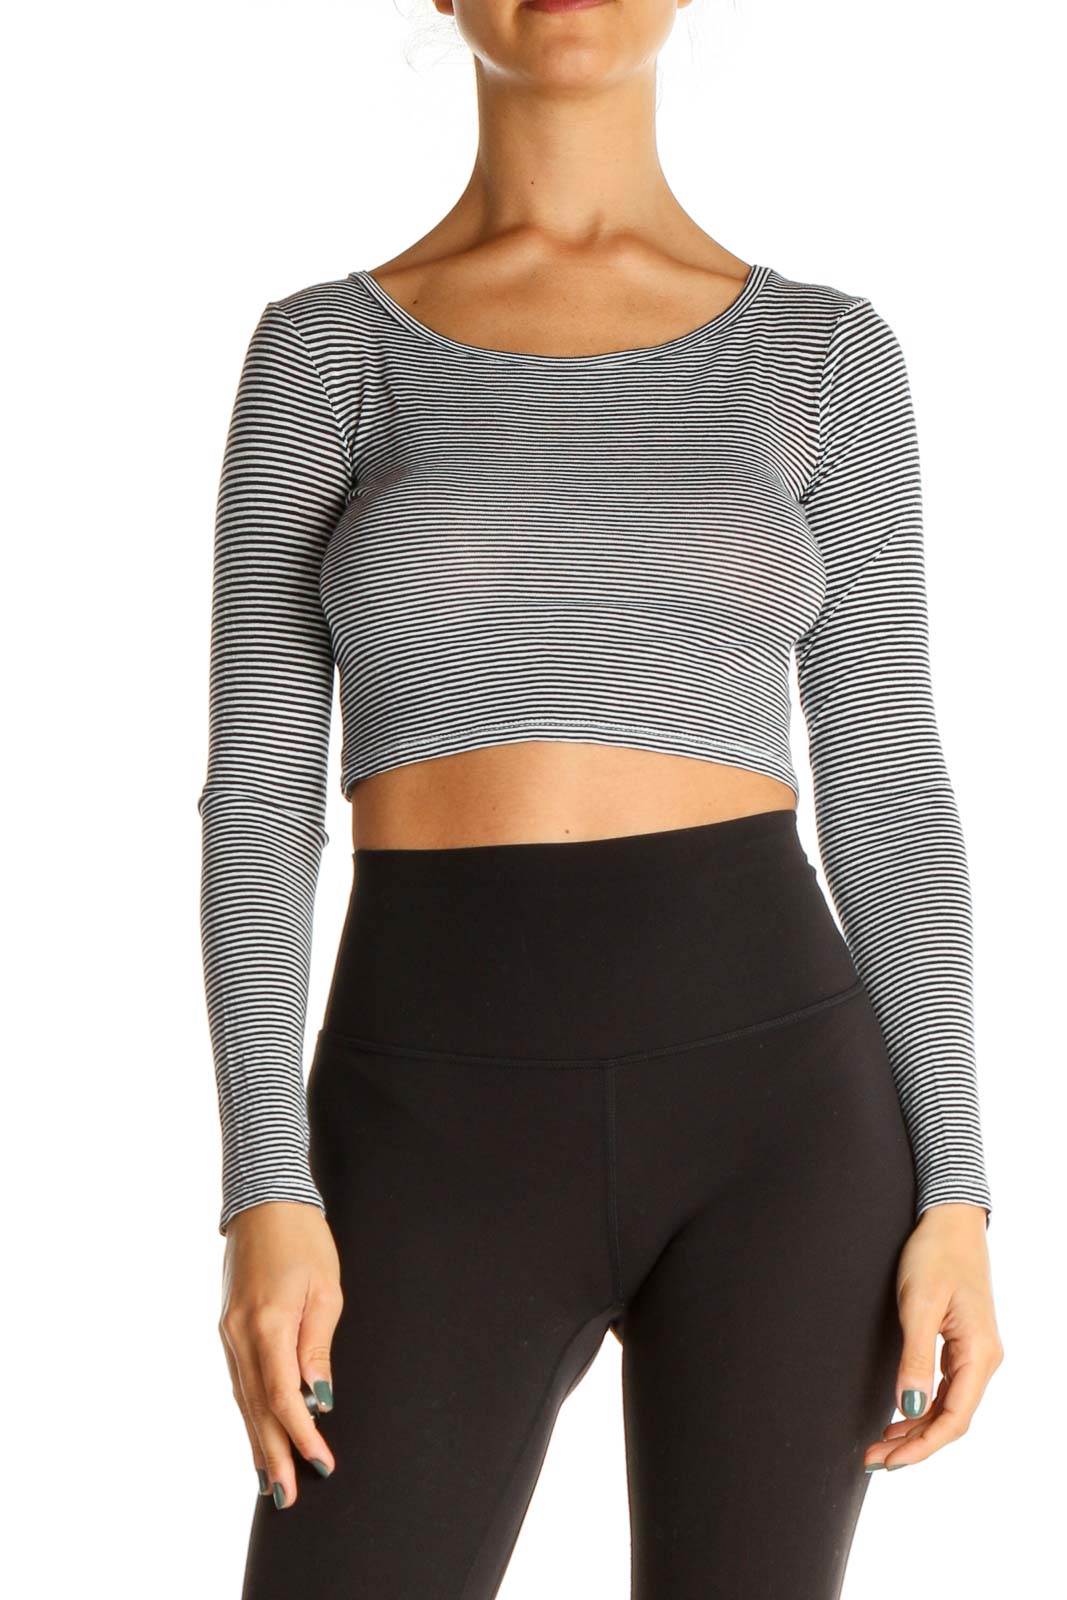 Black Striped Casual Crop Top Front